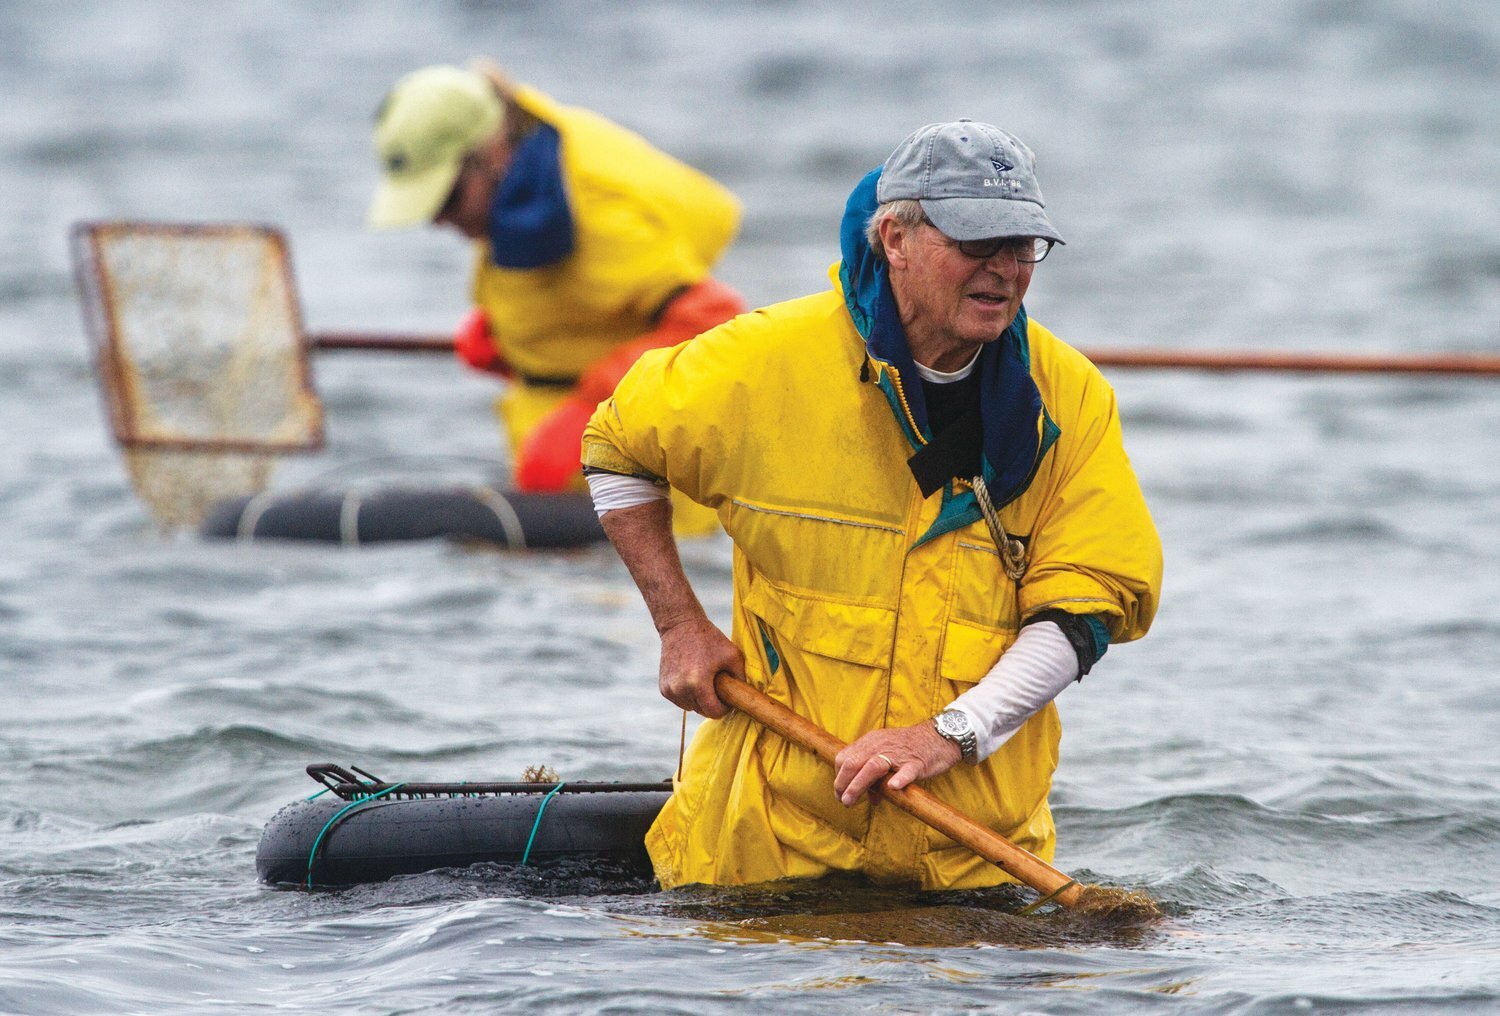 Martin McKerrow uses his pushrake at Little Neck in Madaket on the first day of recreational scalloping season in 2014.